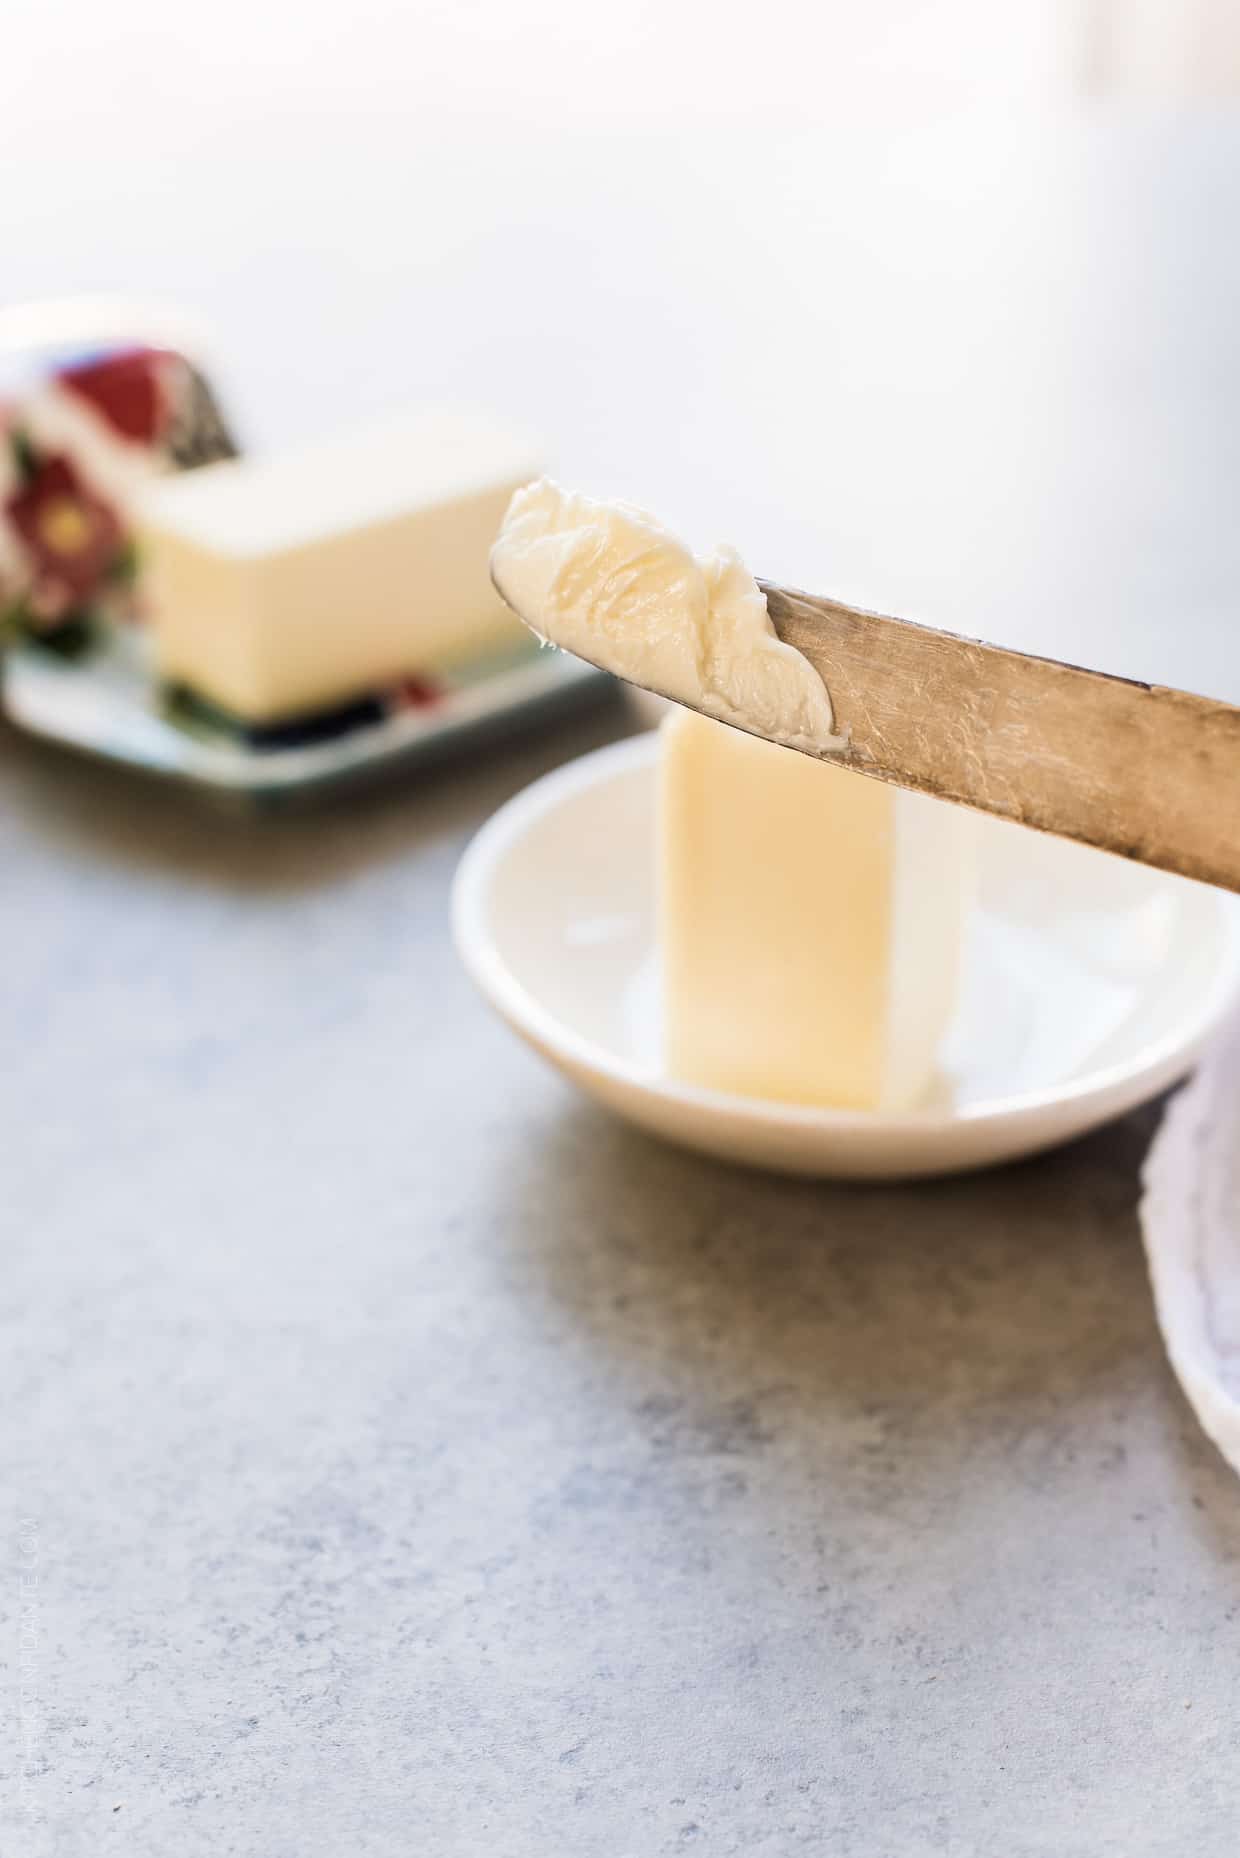 Butter knife with softened butter on it and a stick of butter in the background.